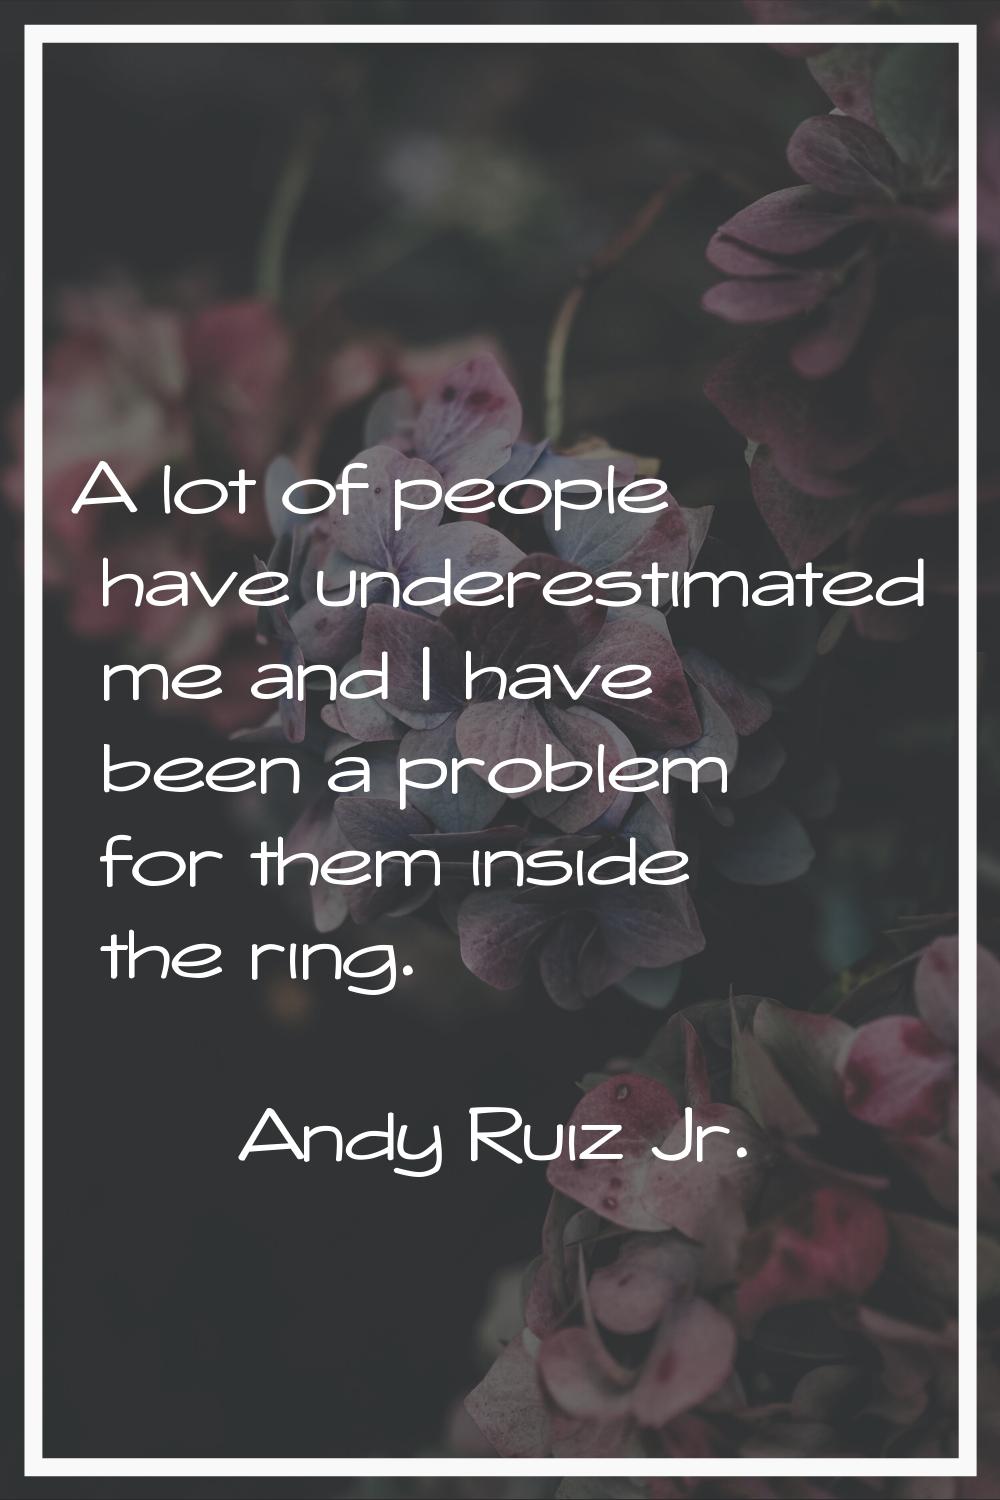 A lot of people have underestimated me and I have been a problem for them inside the ring.